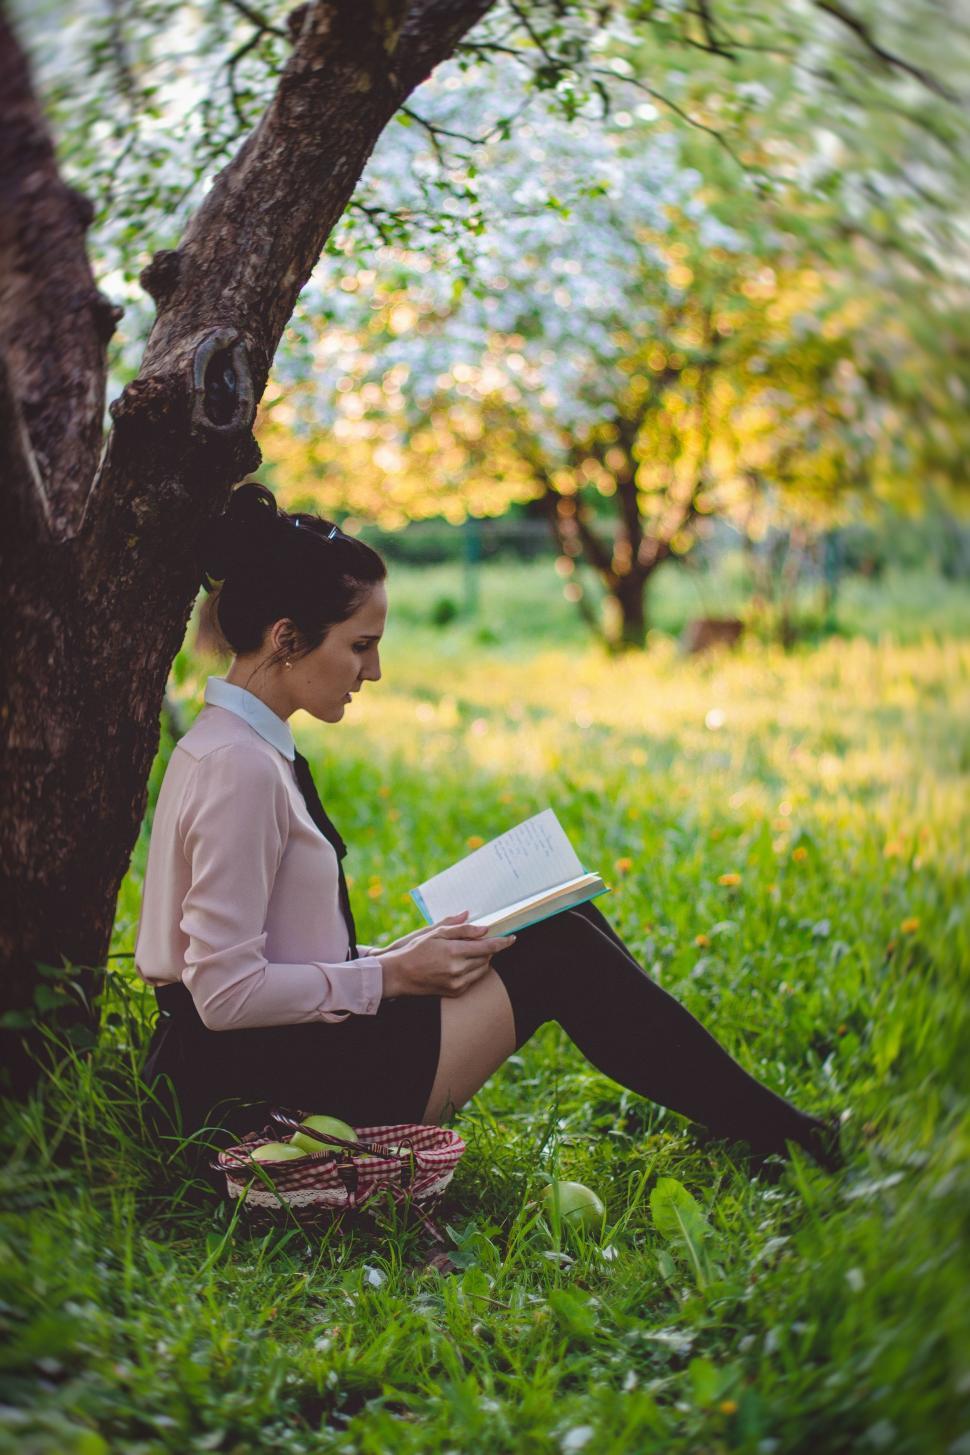 Download Free Stock Photo of Woman sitting under tree reading a book  